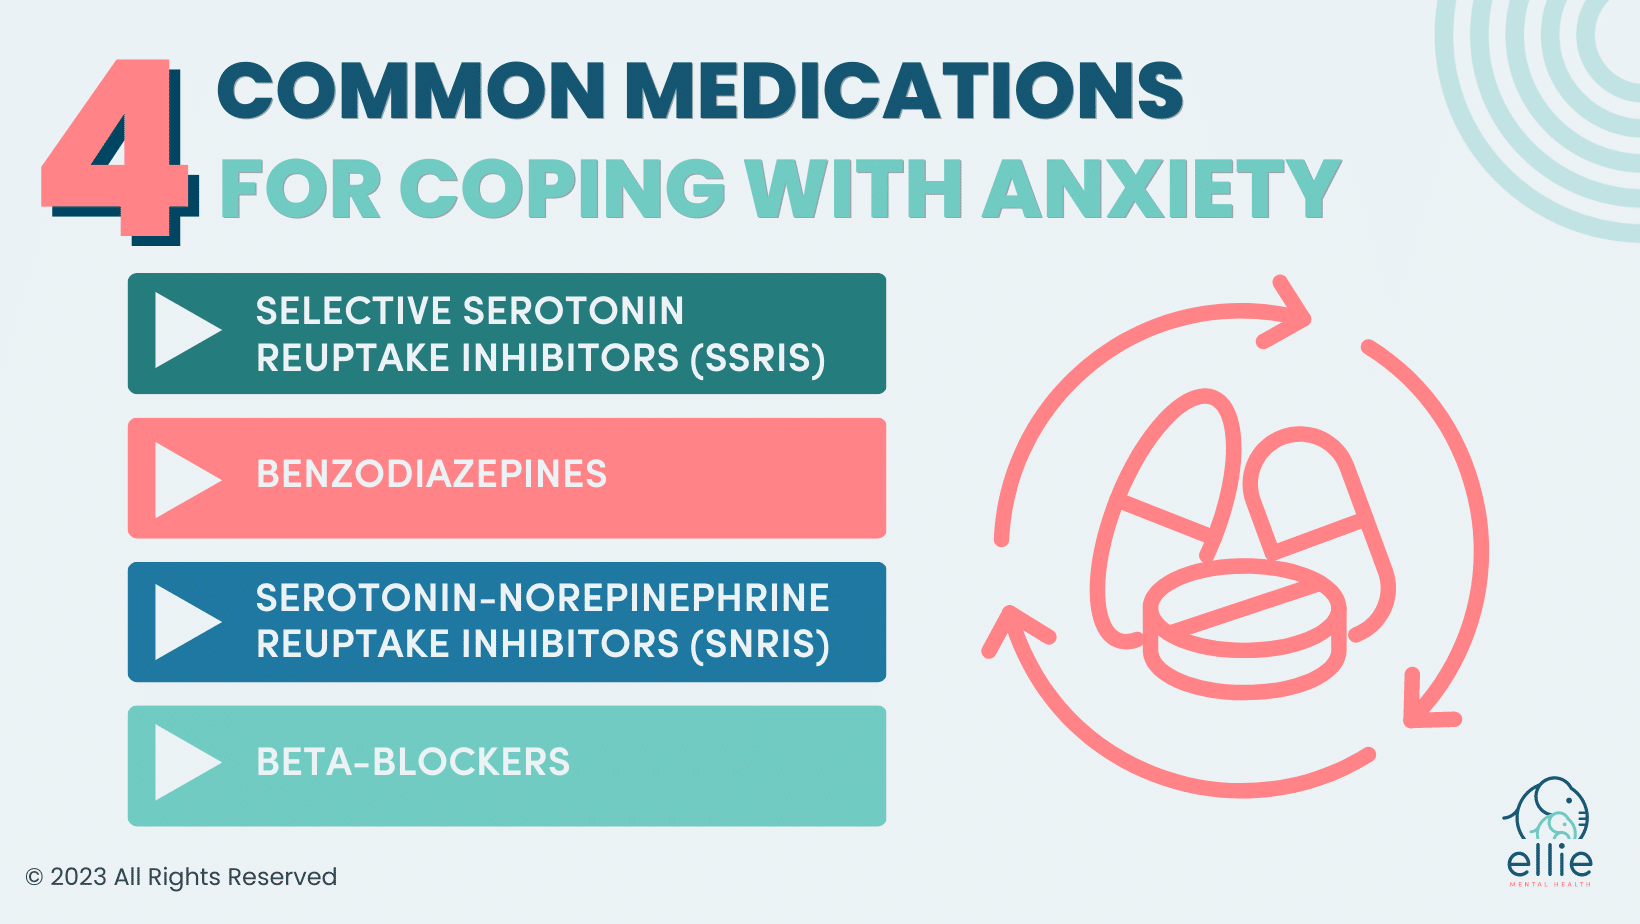 4 common medications for coping with anxiety infographic